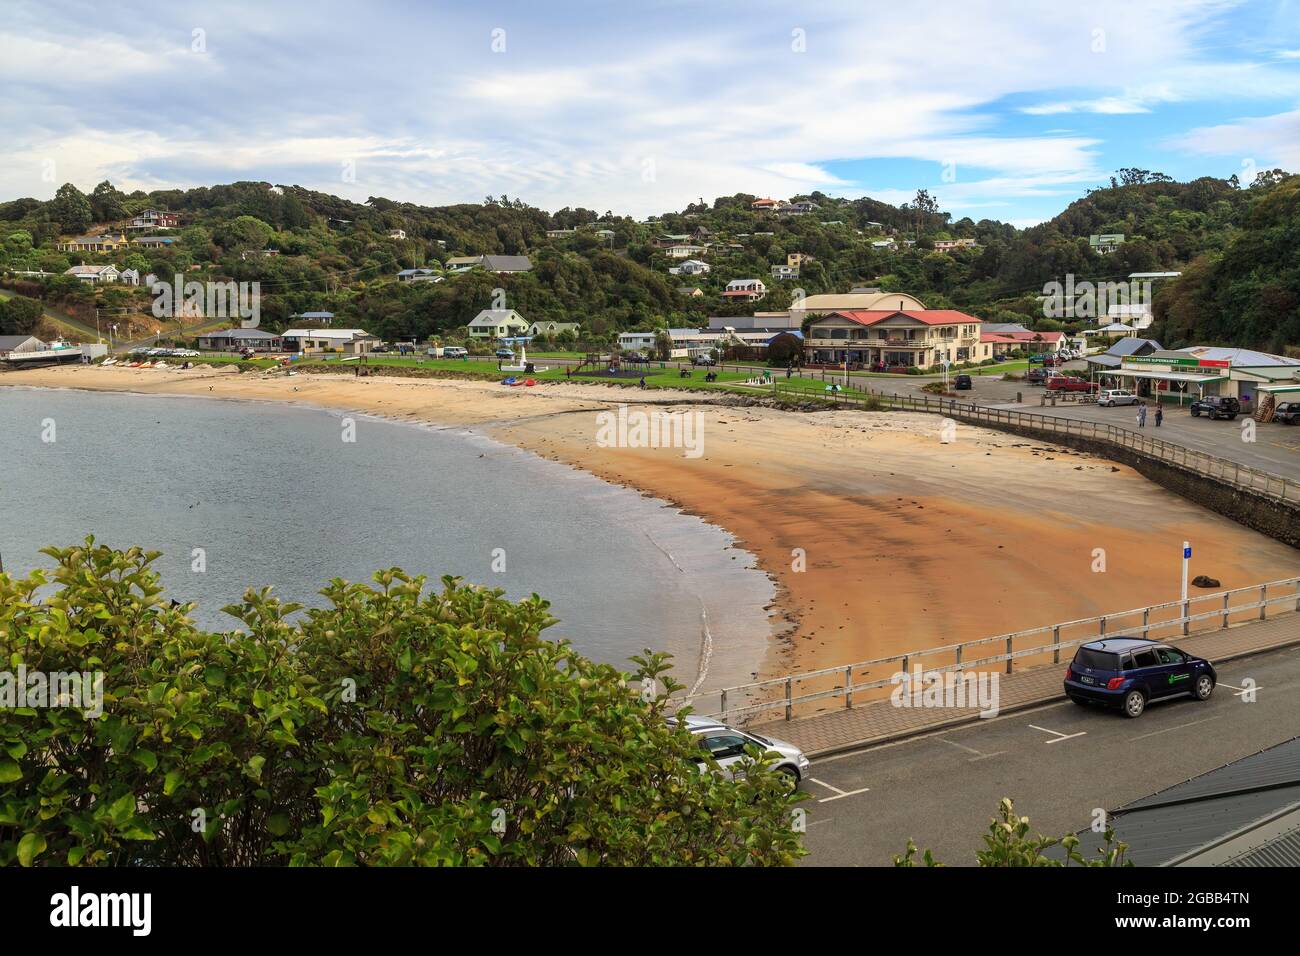 The small town of Oban on Stewart Island, New Zealand, located on Halfmoon Bay Stock Photo